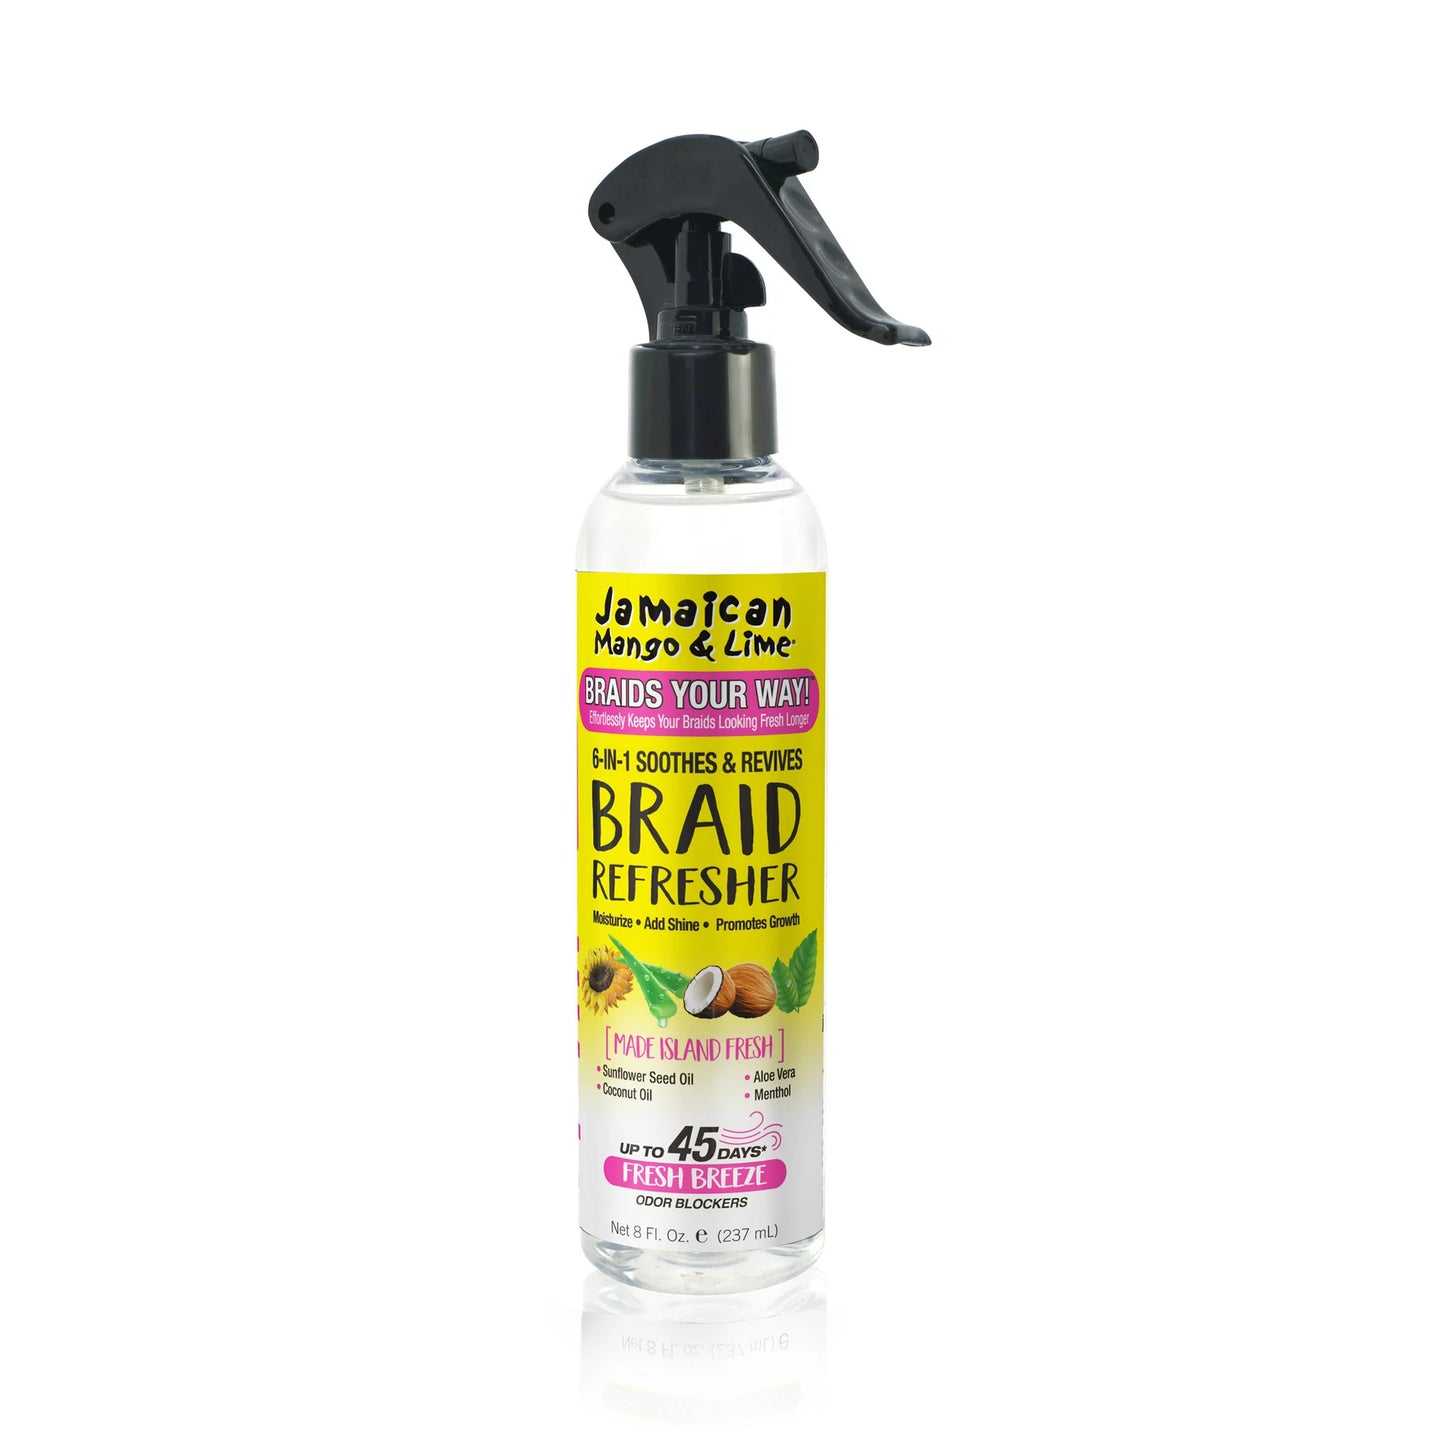 Jamaican Mango & Lime - Braids Your Way 6 in 1 soothes & Revives Braid Refresh - 237ml